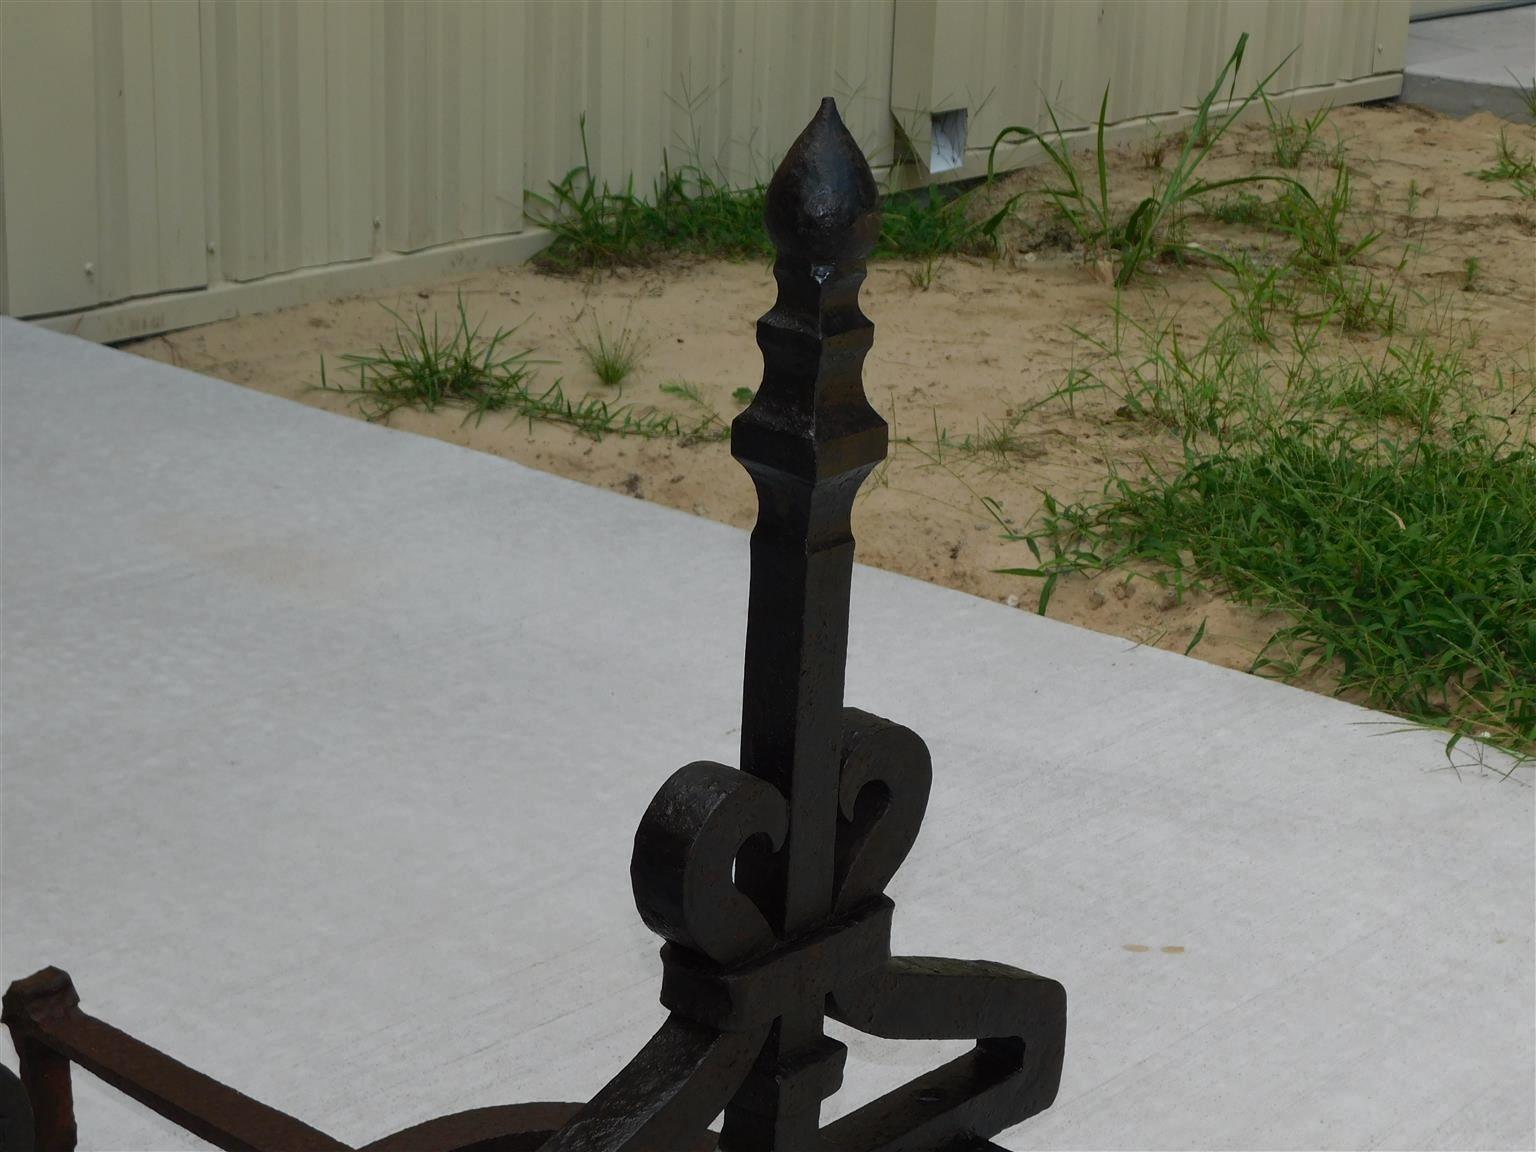 American Wrought Iron Faceted Lemon Finial Andirons w/ Scrolled Plinths, C. 1820 For Sale 2